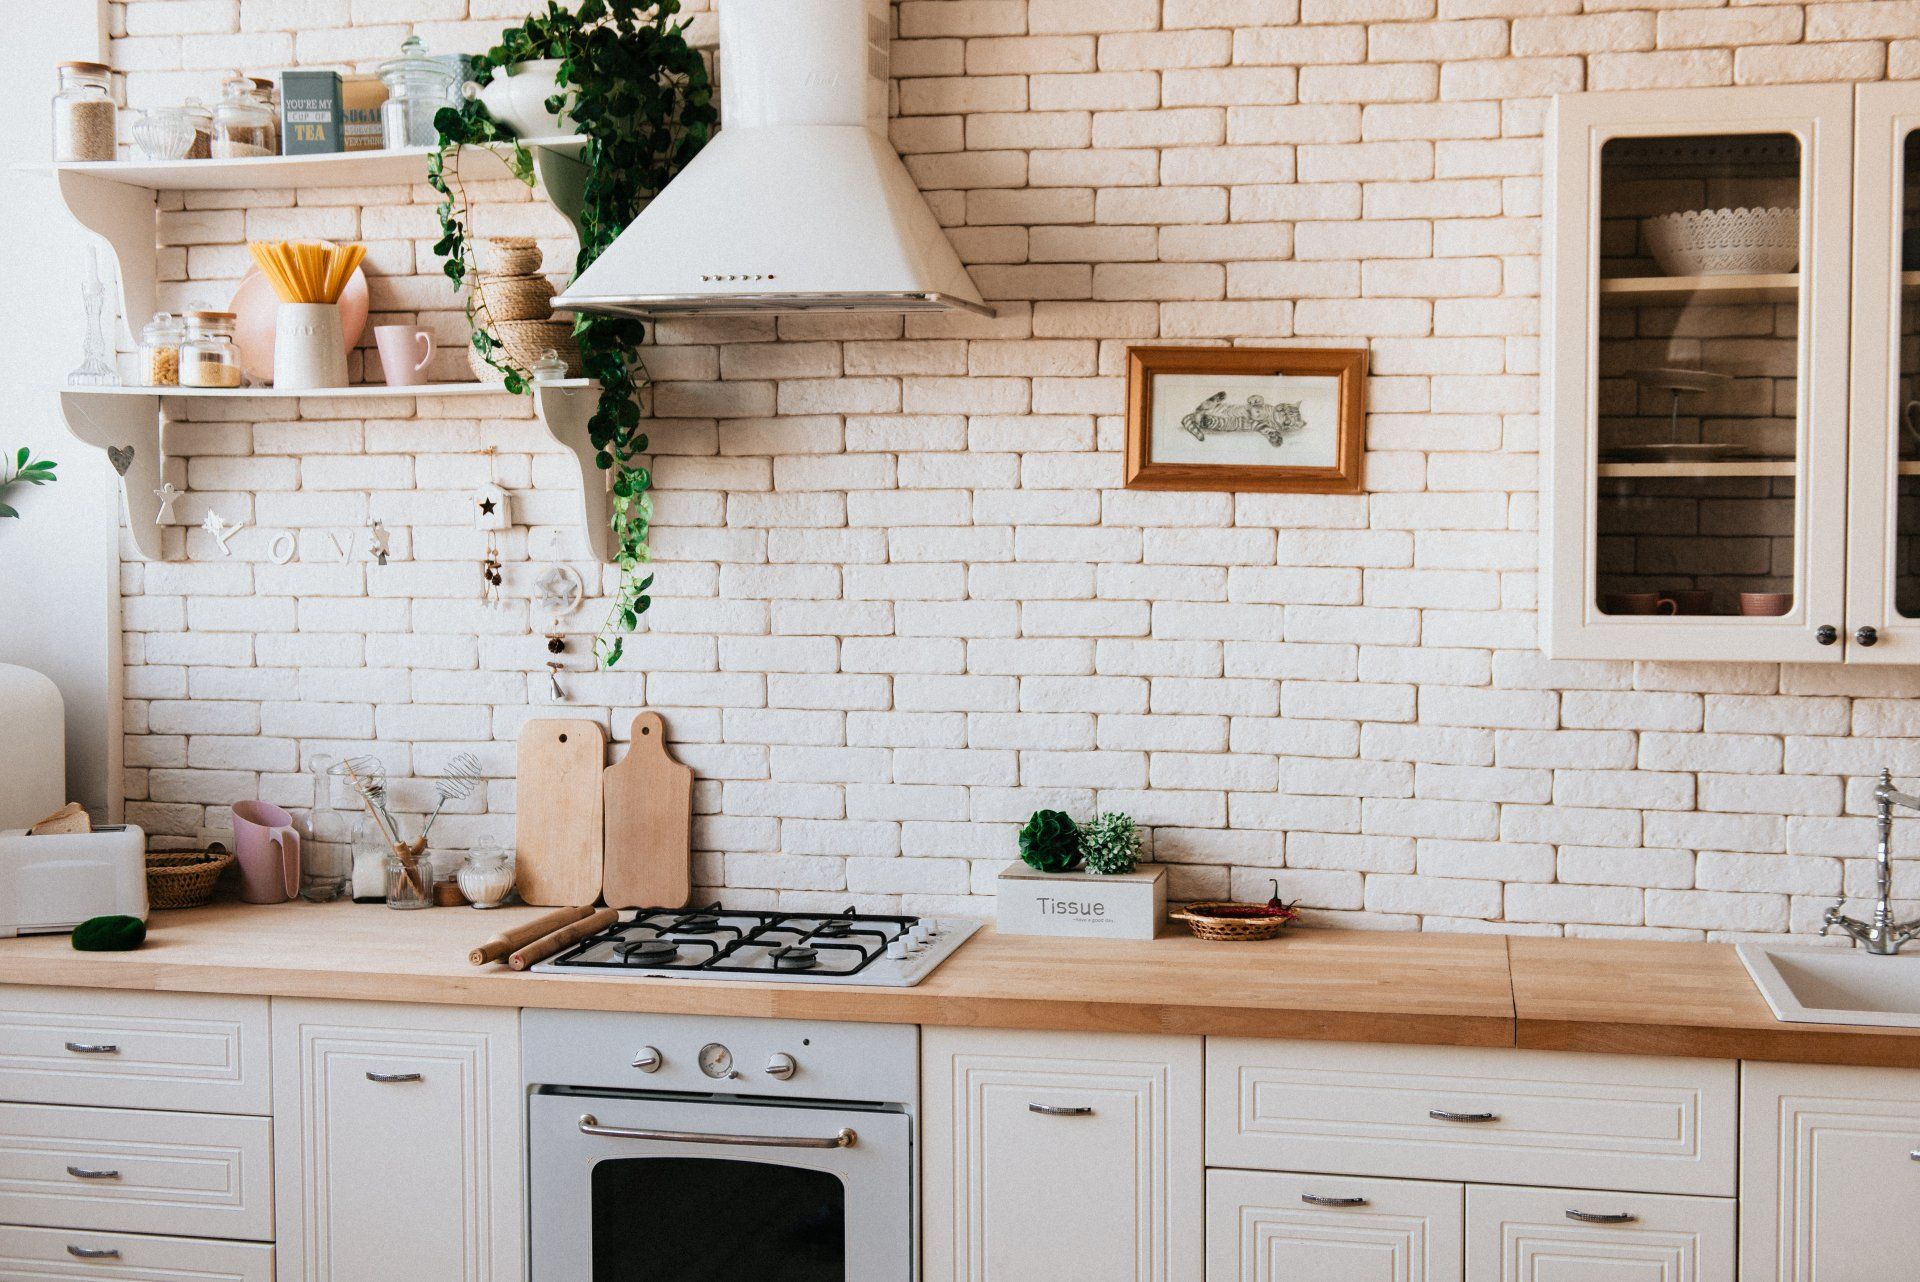 A cozy kitchen corner with an off-white brick wall and wooden countertops